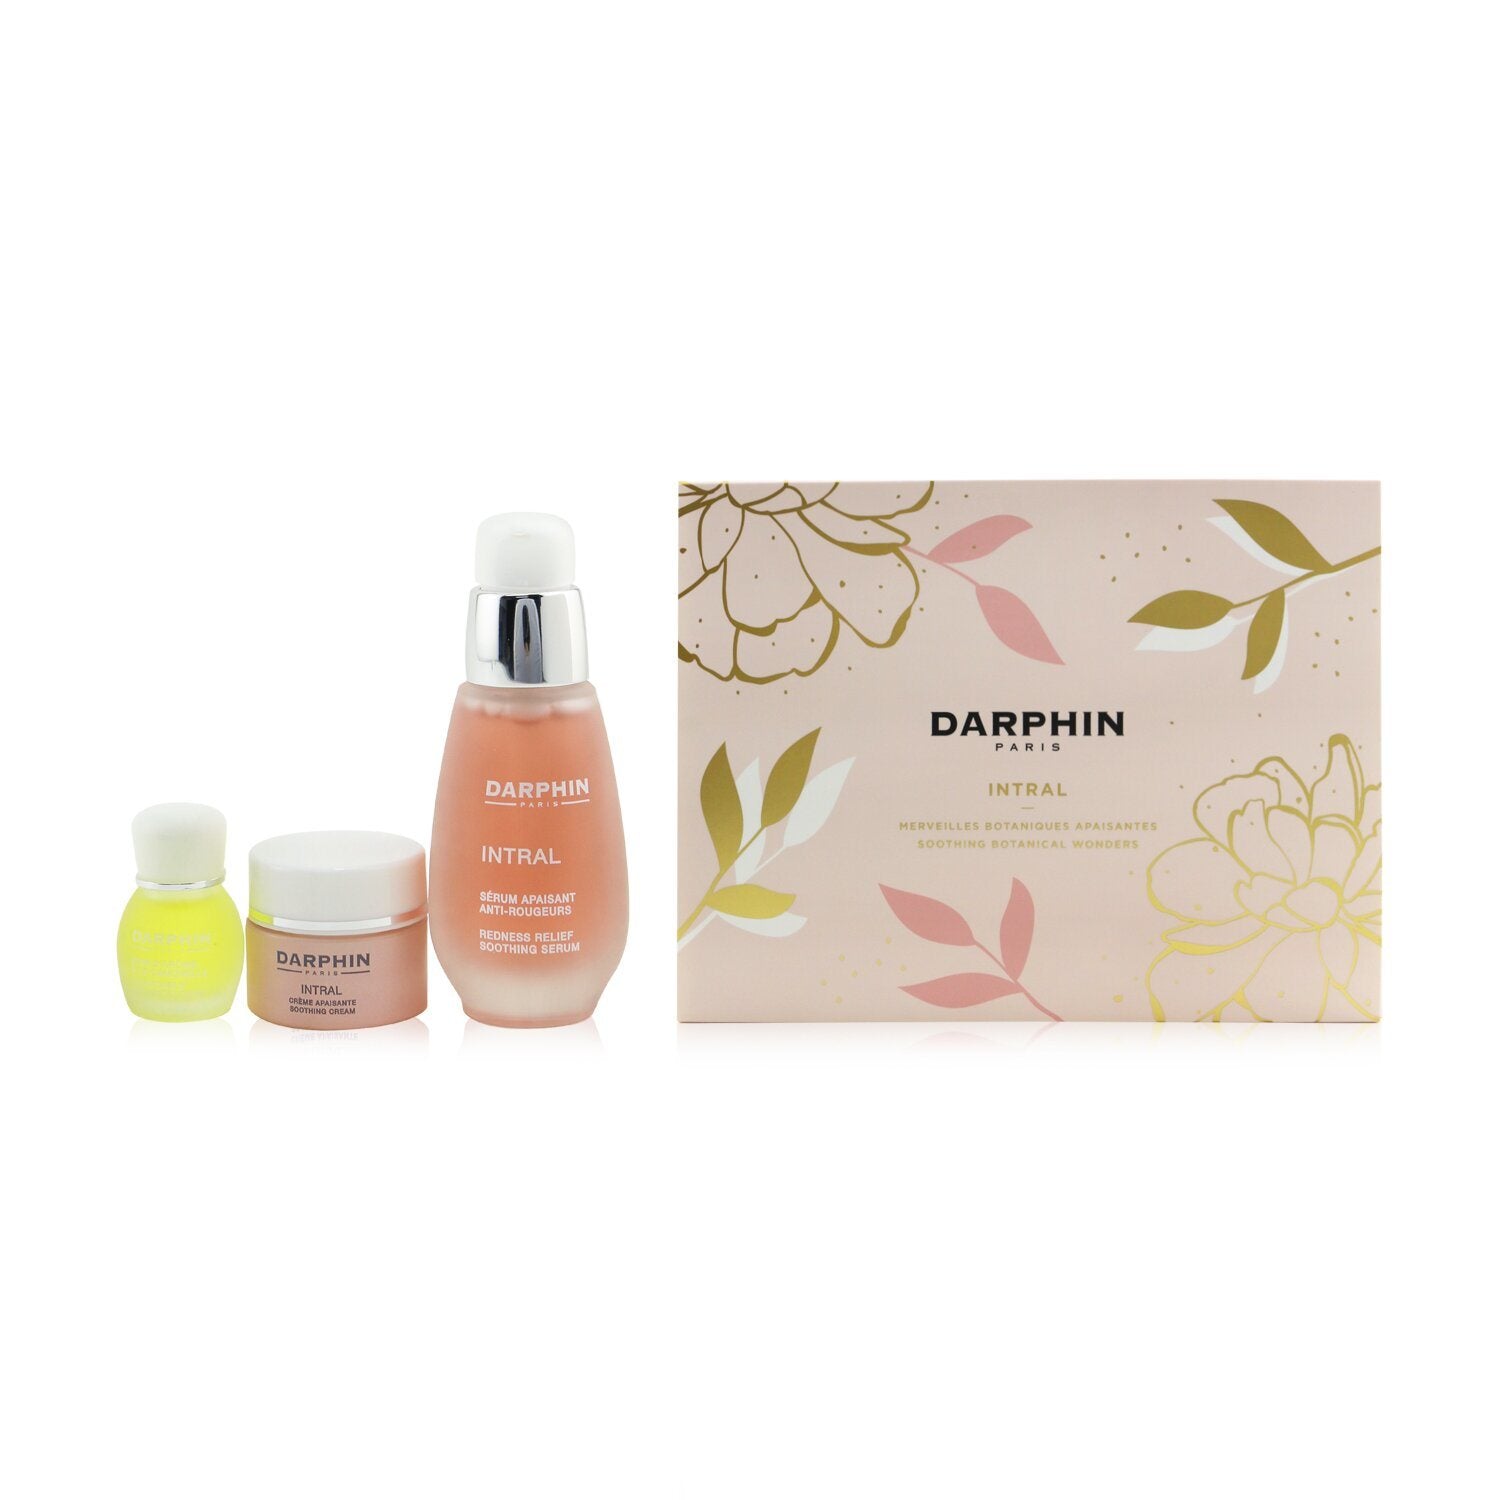 Darphin - Intral Soothing Botanical Wonders Set: Soothing Serum 30ml+ Soothing Cream 5ml+ Chamomile Aromatic Care 4ml - 3pcs - lolaluxeshop